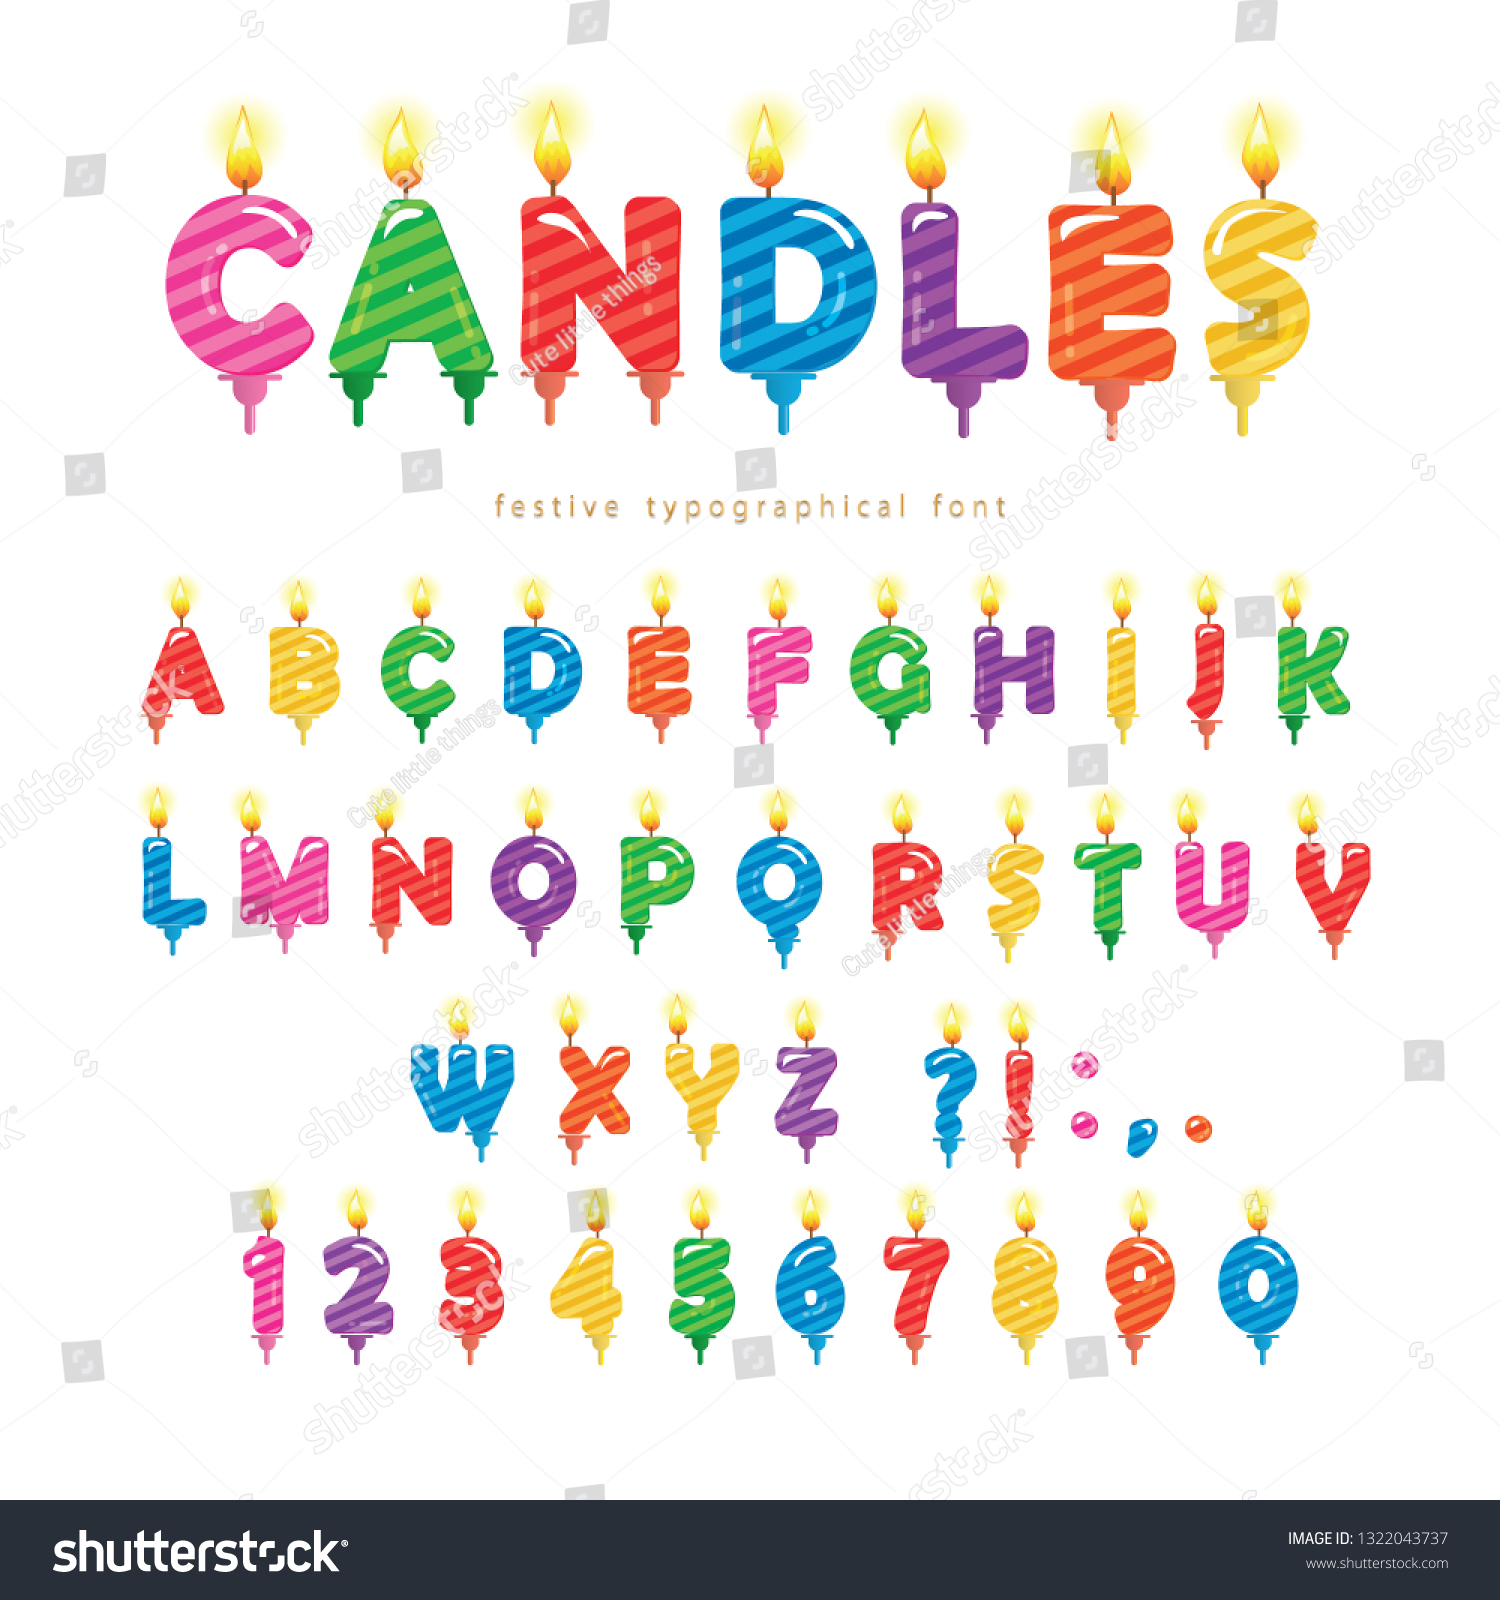 SVG of Birthday candles colorful font design. Bright festive ABC letters and numbers isolated on white. Vector svg